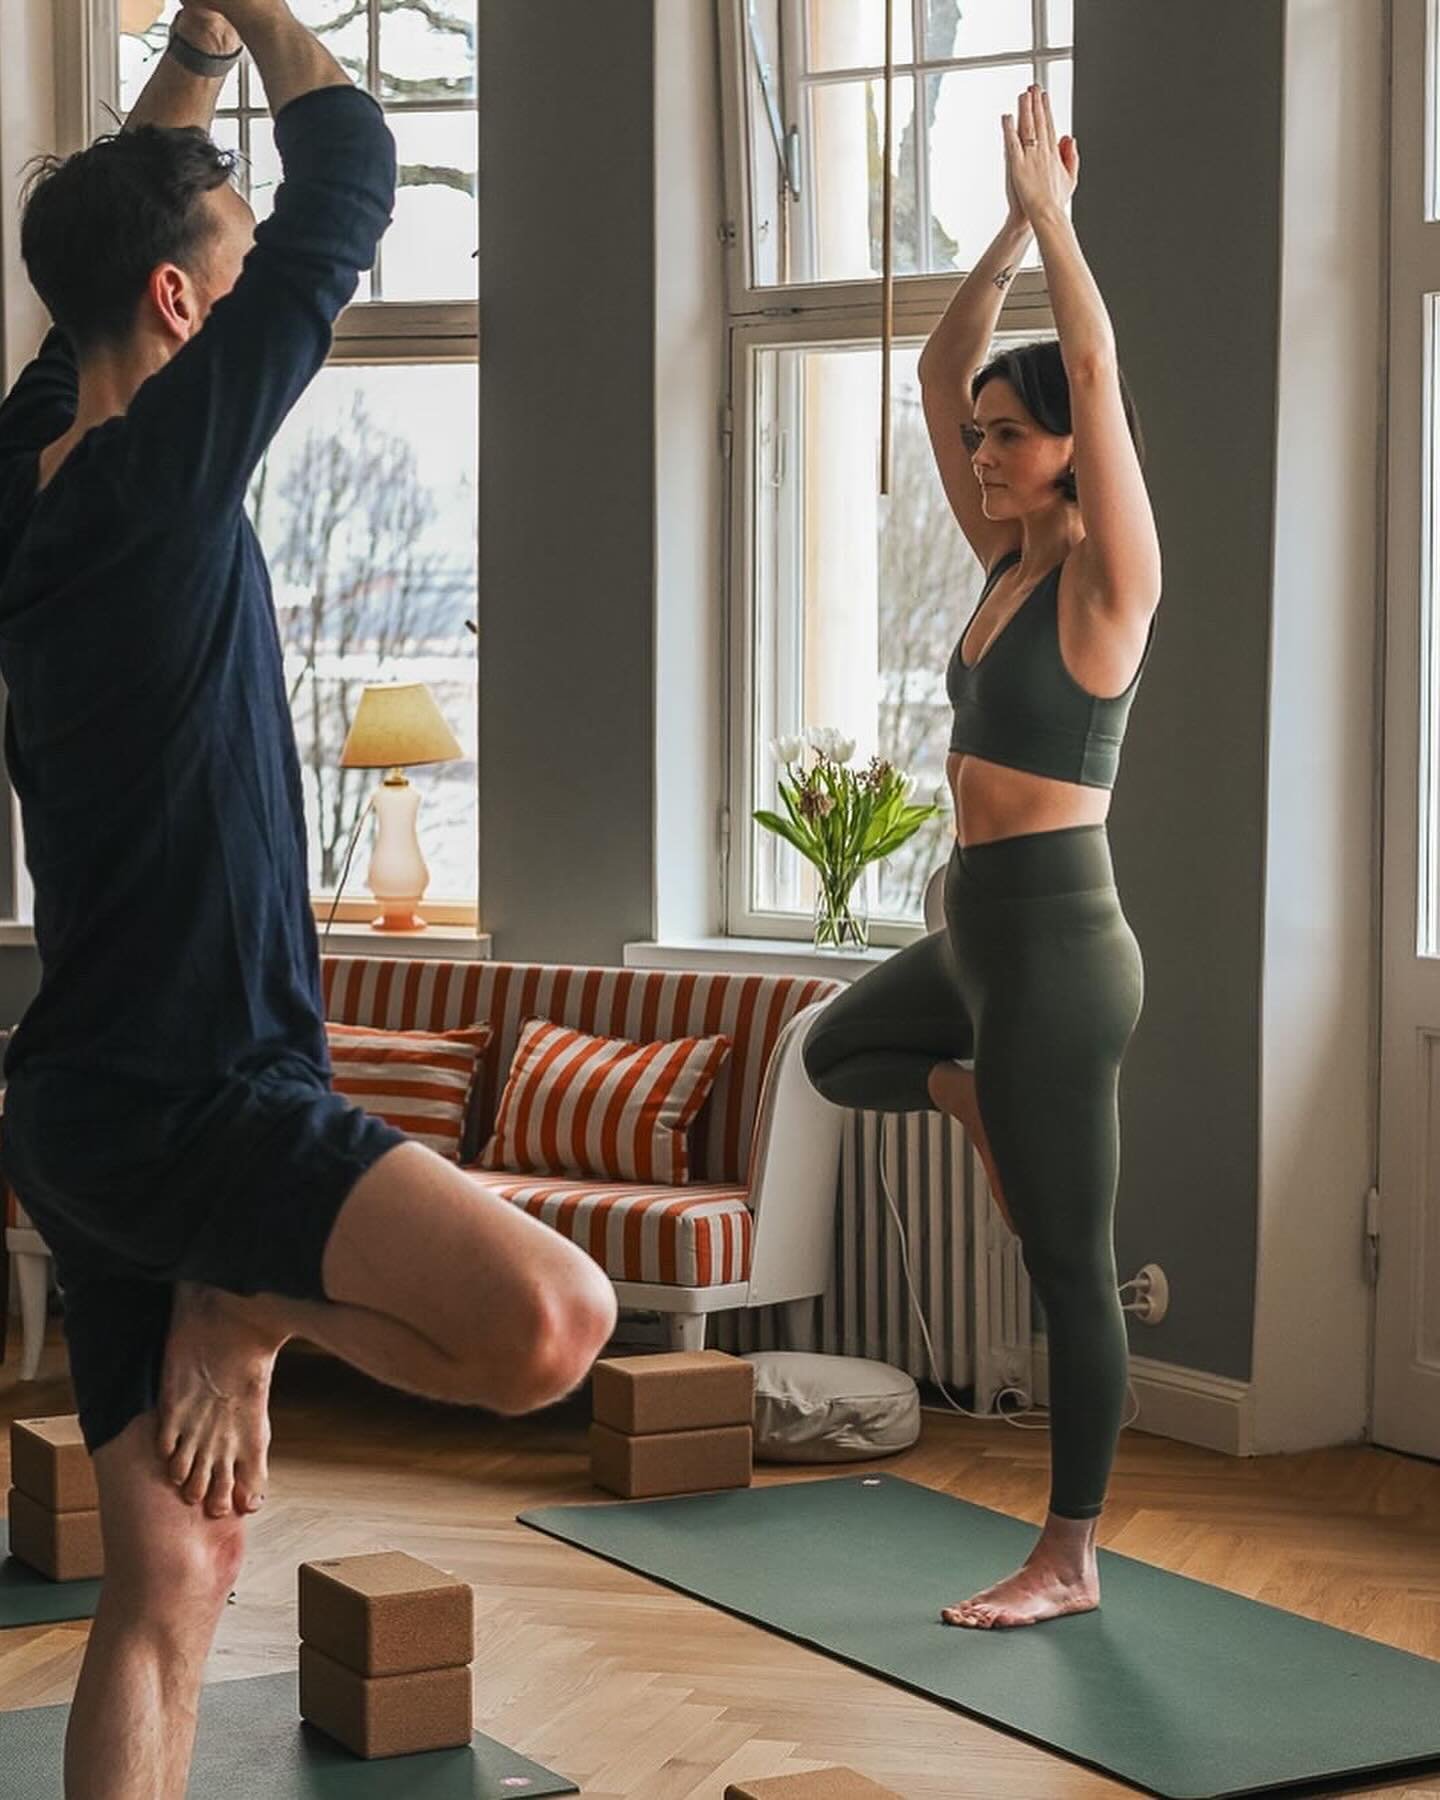 For #MentalHealthAwarenessWeek, it feels right to highlight Livsakademi at boutique wellness hotel @Billnas_Gard. 🙏
 
One hour outside of Finland, passionate hoteliers and wellness practitioners Taina and Chris promote a holistic programme of activi